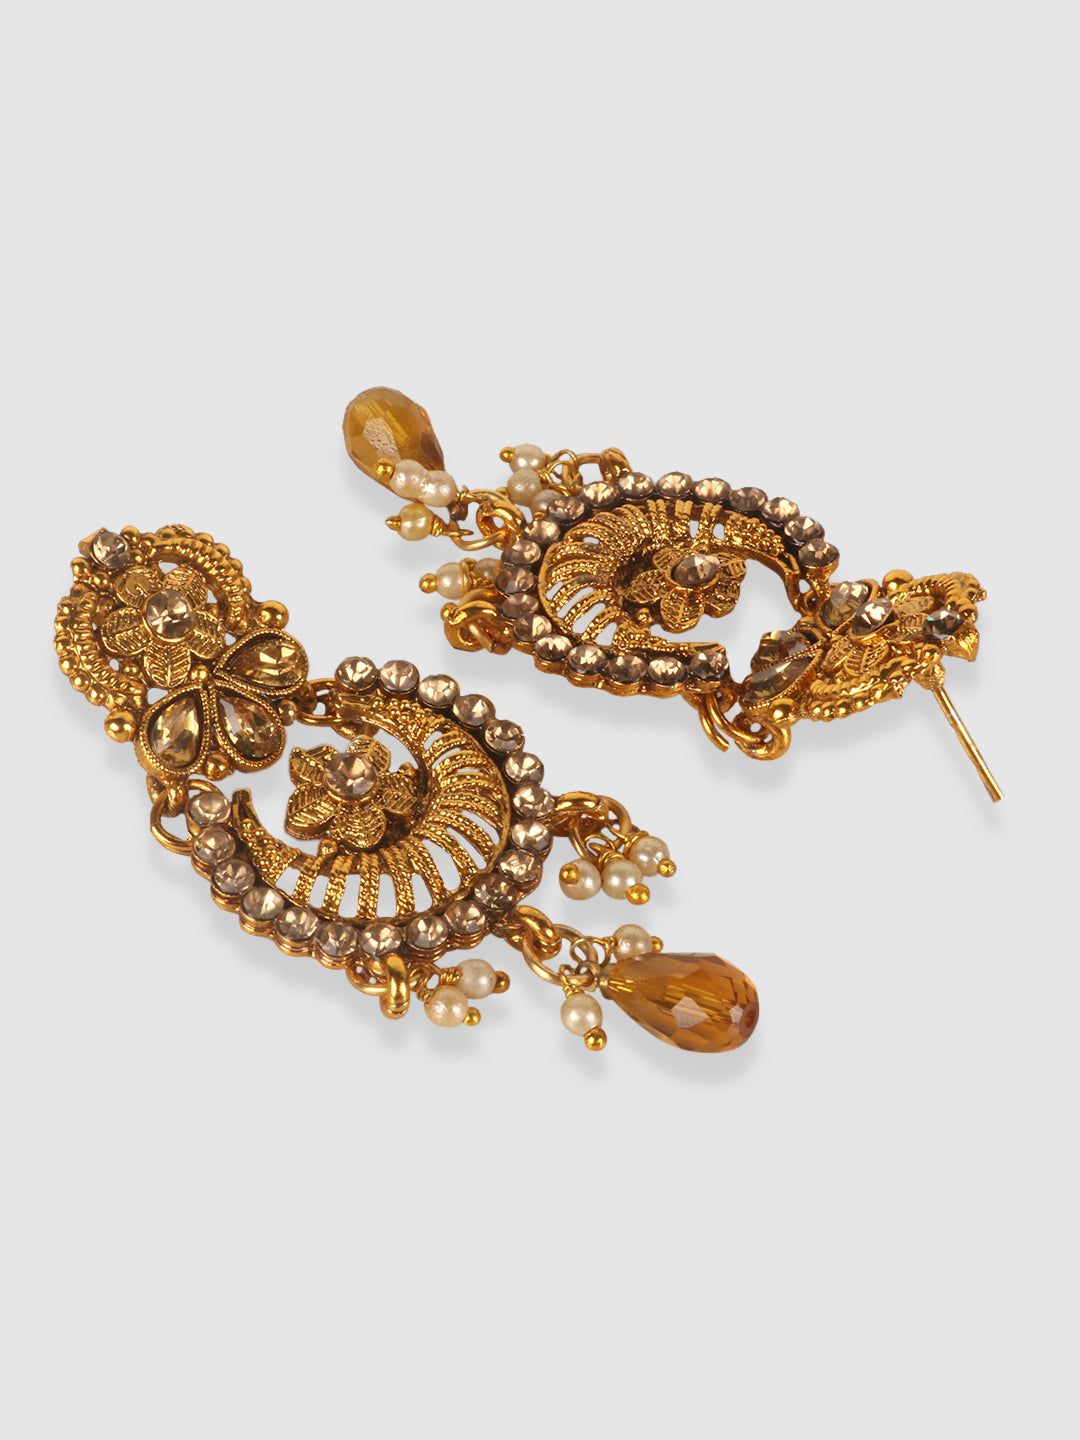 Gold-Plated Stone-Studded Traditional Bridal Jewellery Set